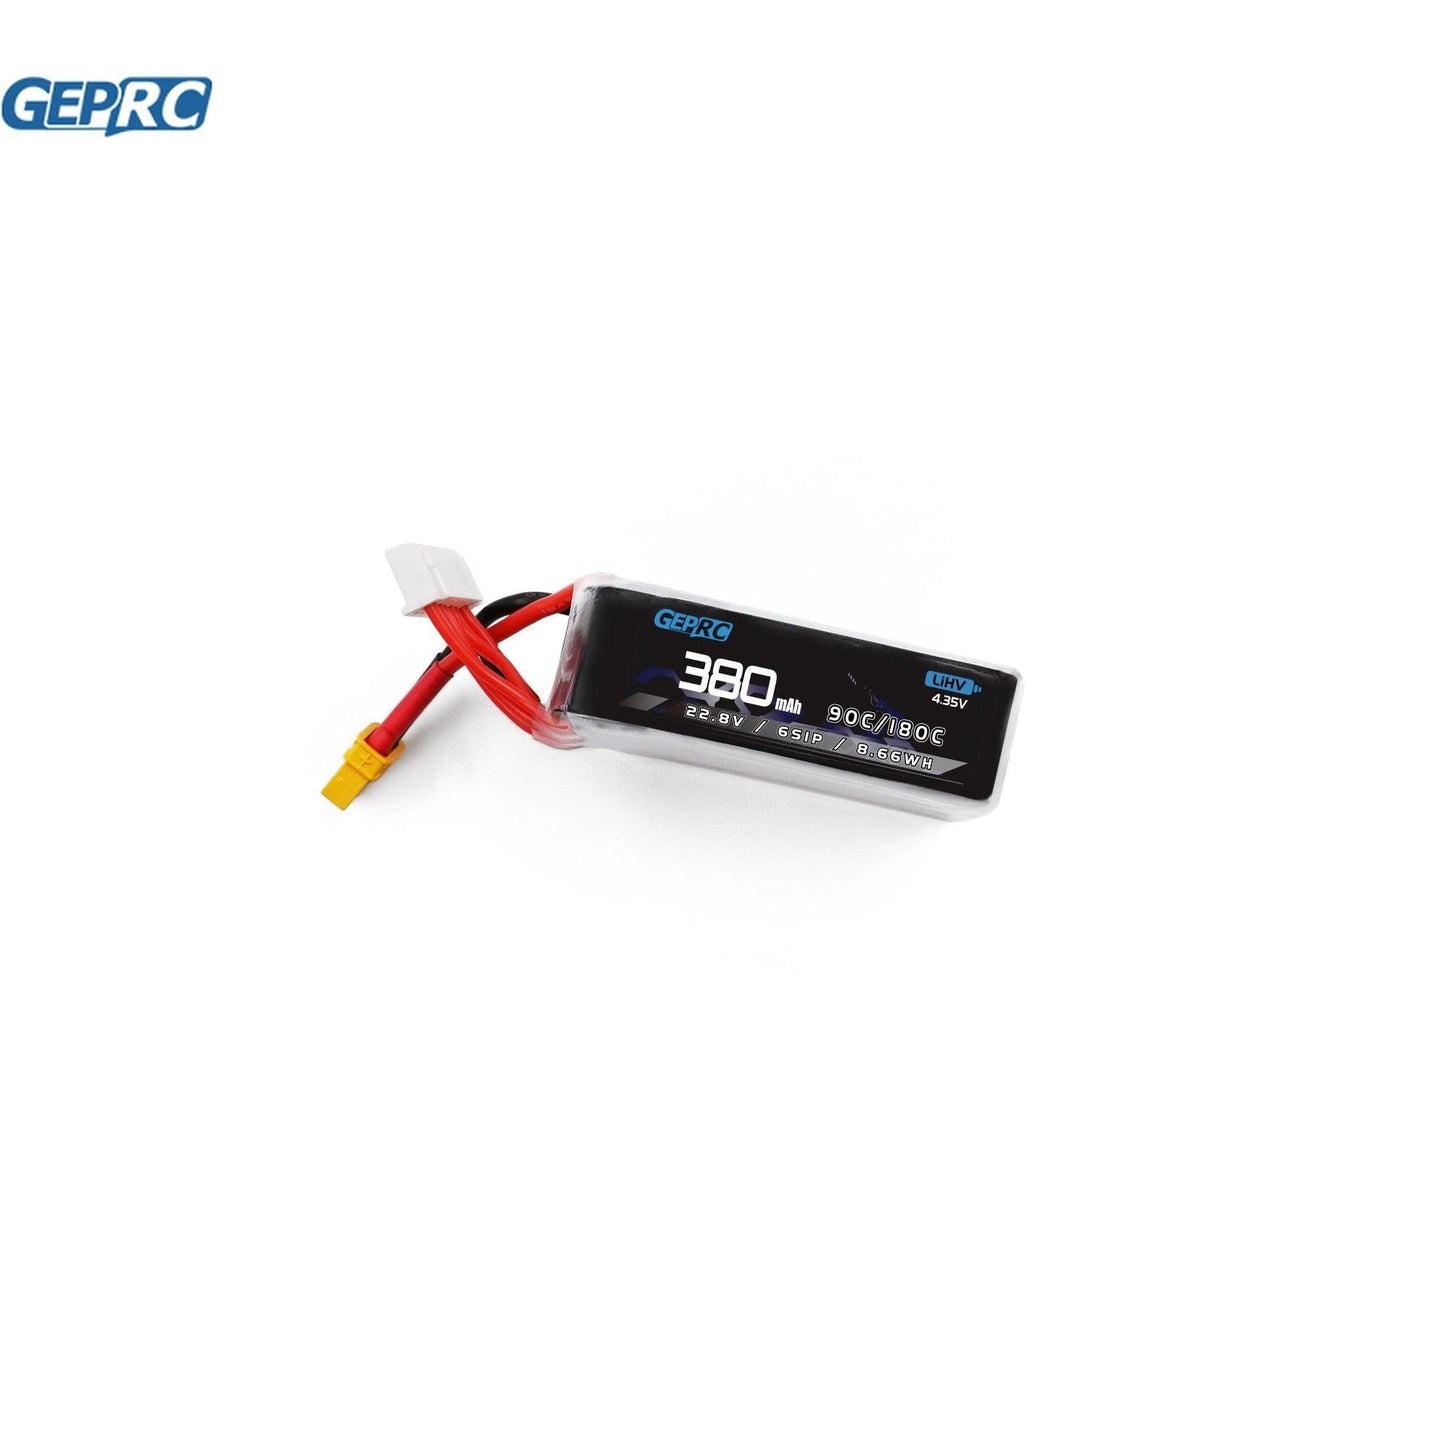 GEPRC 6S 380mAh Battery - 90/180C HV 3.8V/4.35V LiPo Battery Suitable 2-3Inch Series Drone For RC FPV Quadcopter Drone Accessories FPV Drone Battery - RCDrone